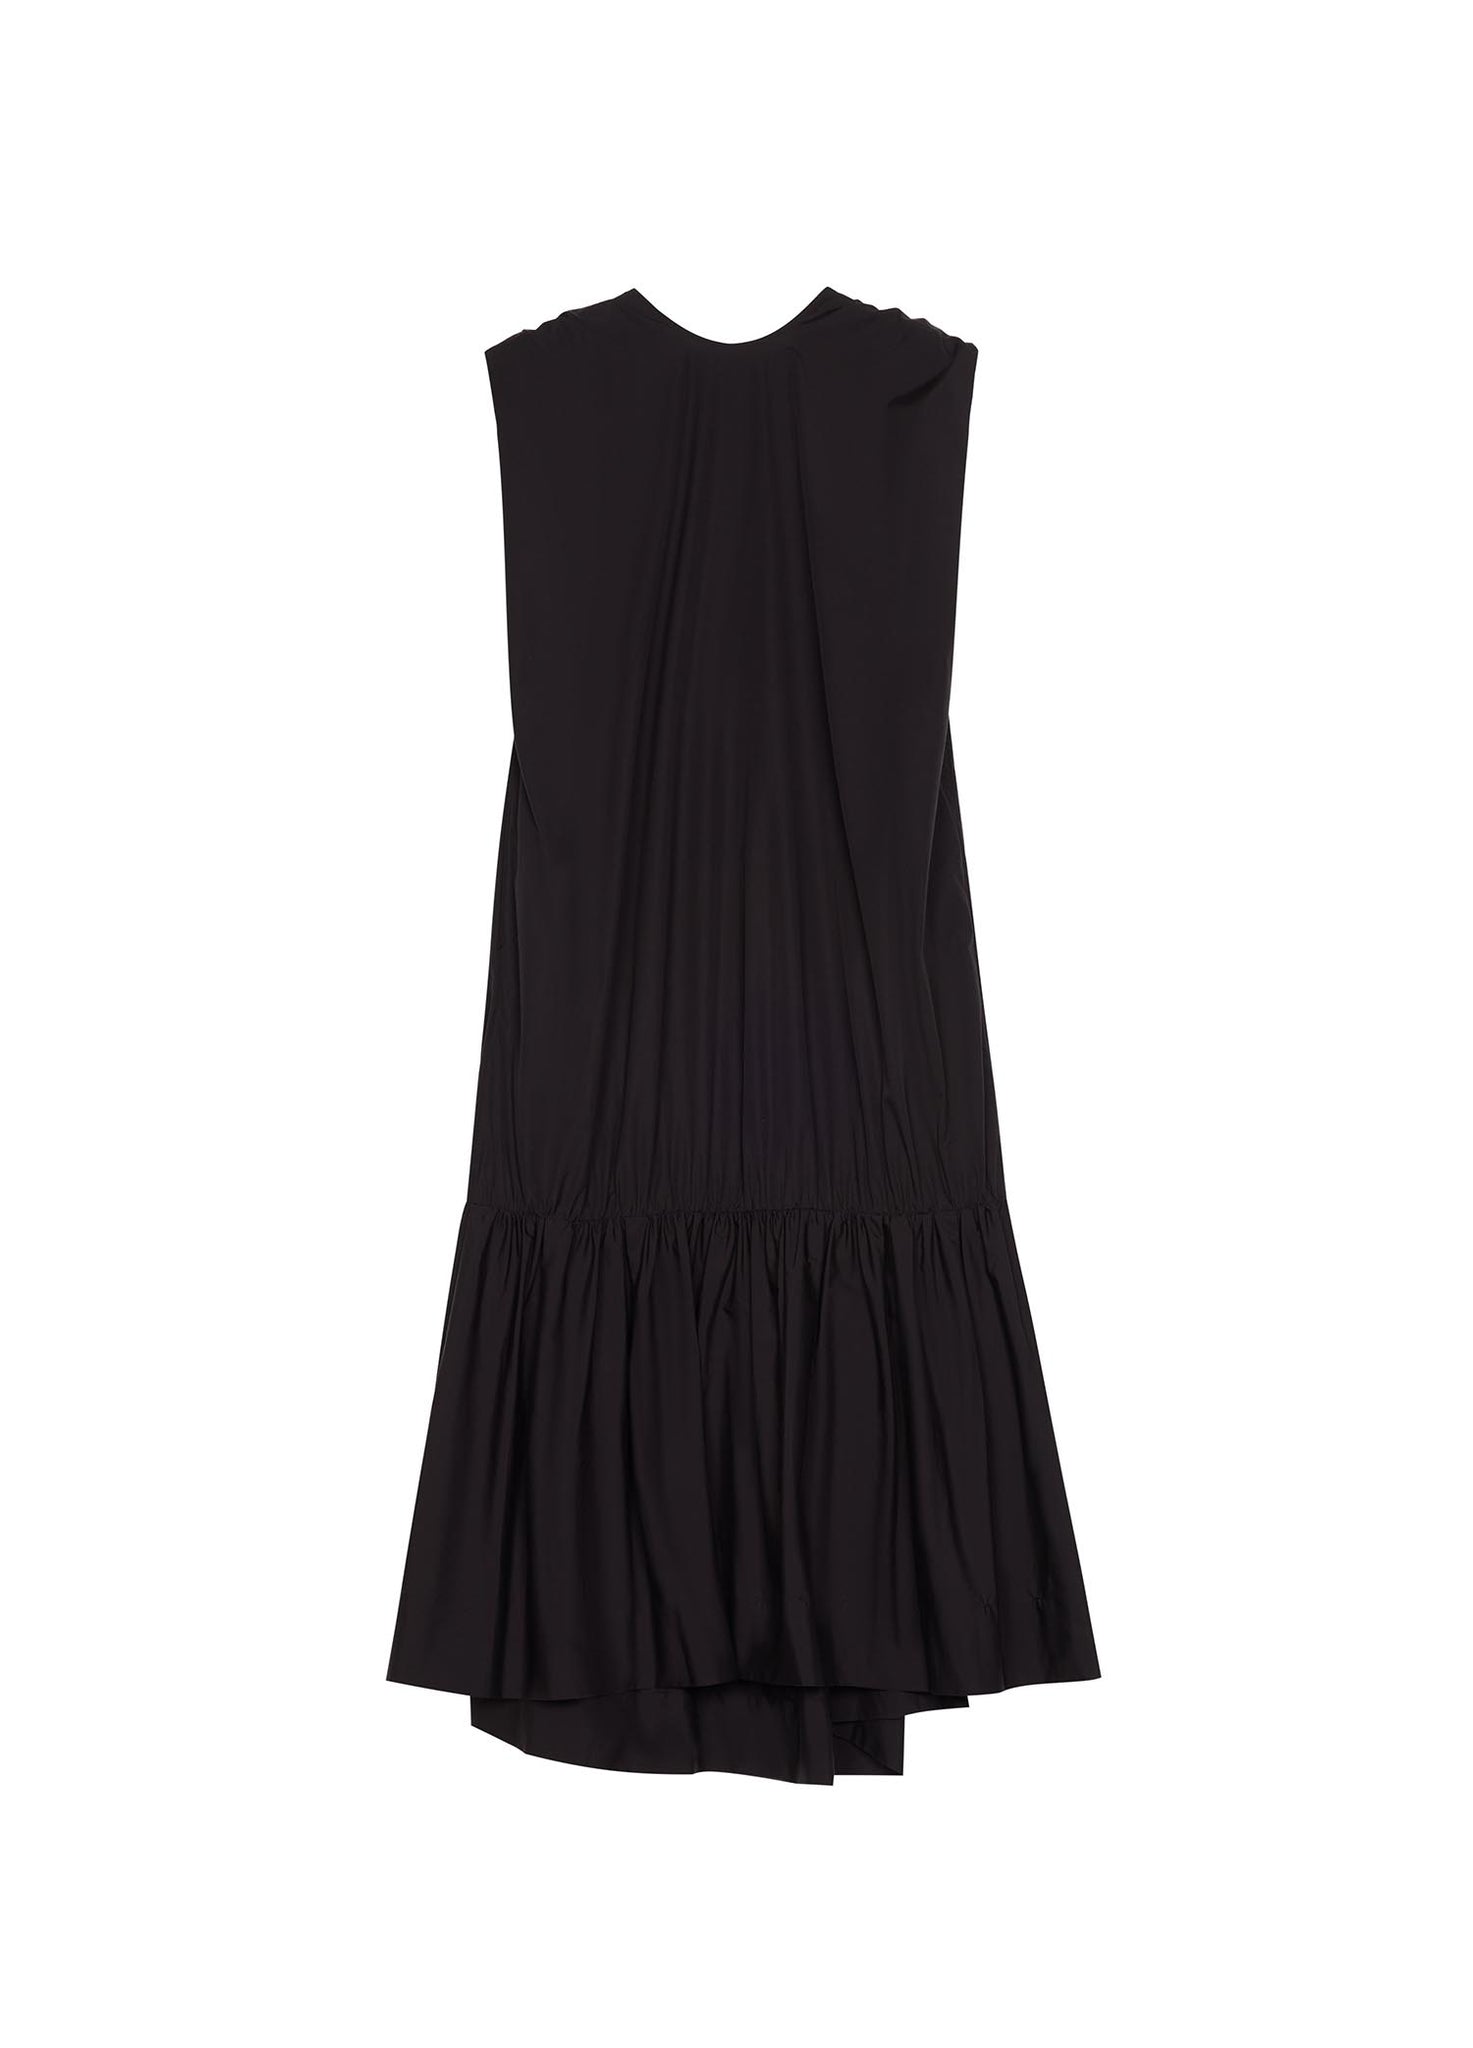 Dresses / JNBY Solid Pleated Sleeveless Dress (100% Cotton)